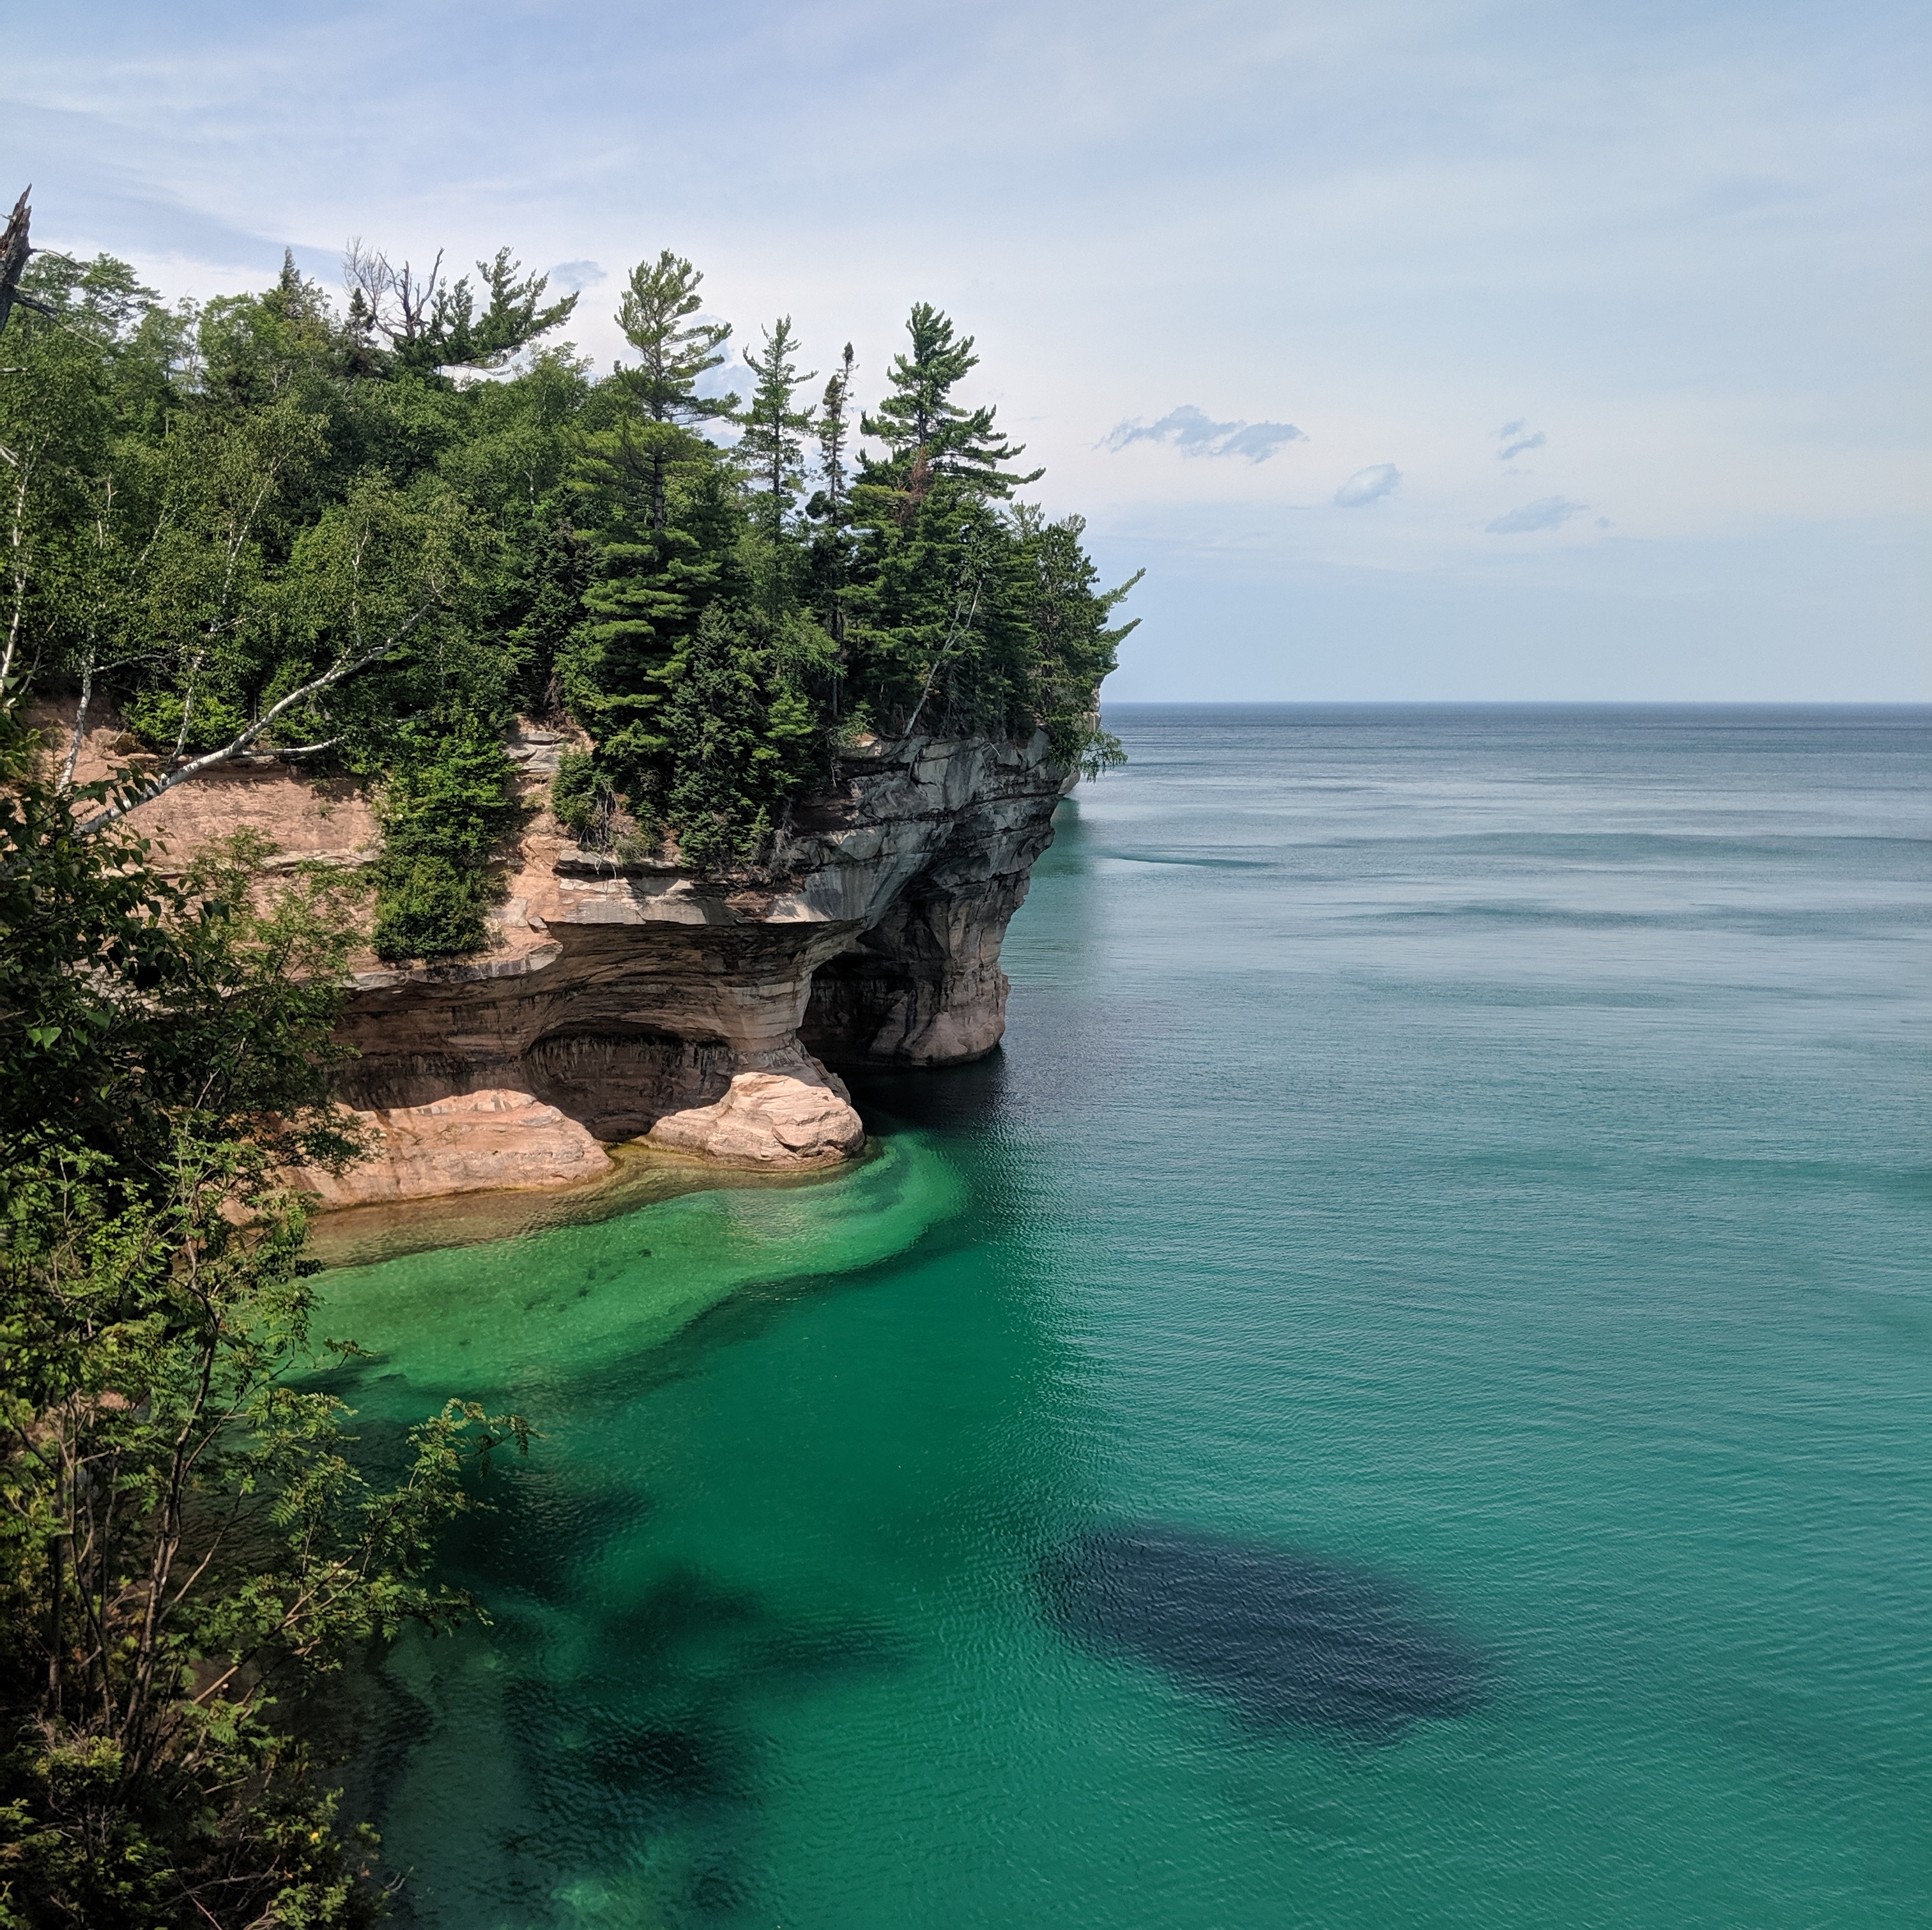 A view of Pictured Rocks and Lake Superior in the Upper Peninsula of Michigan